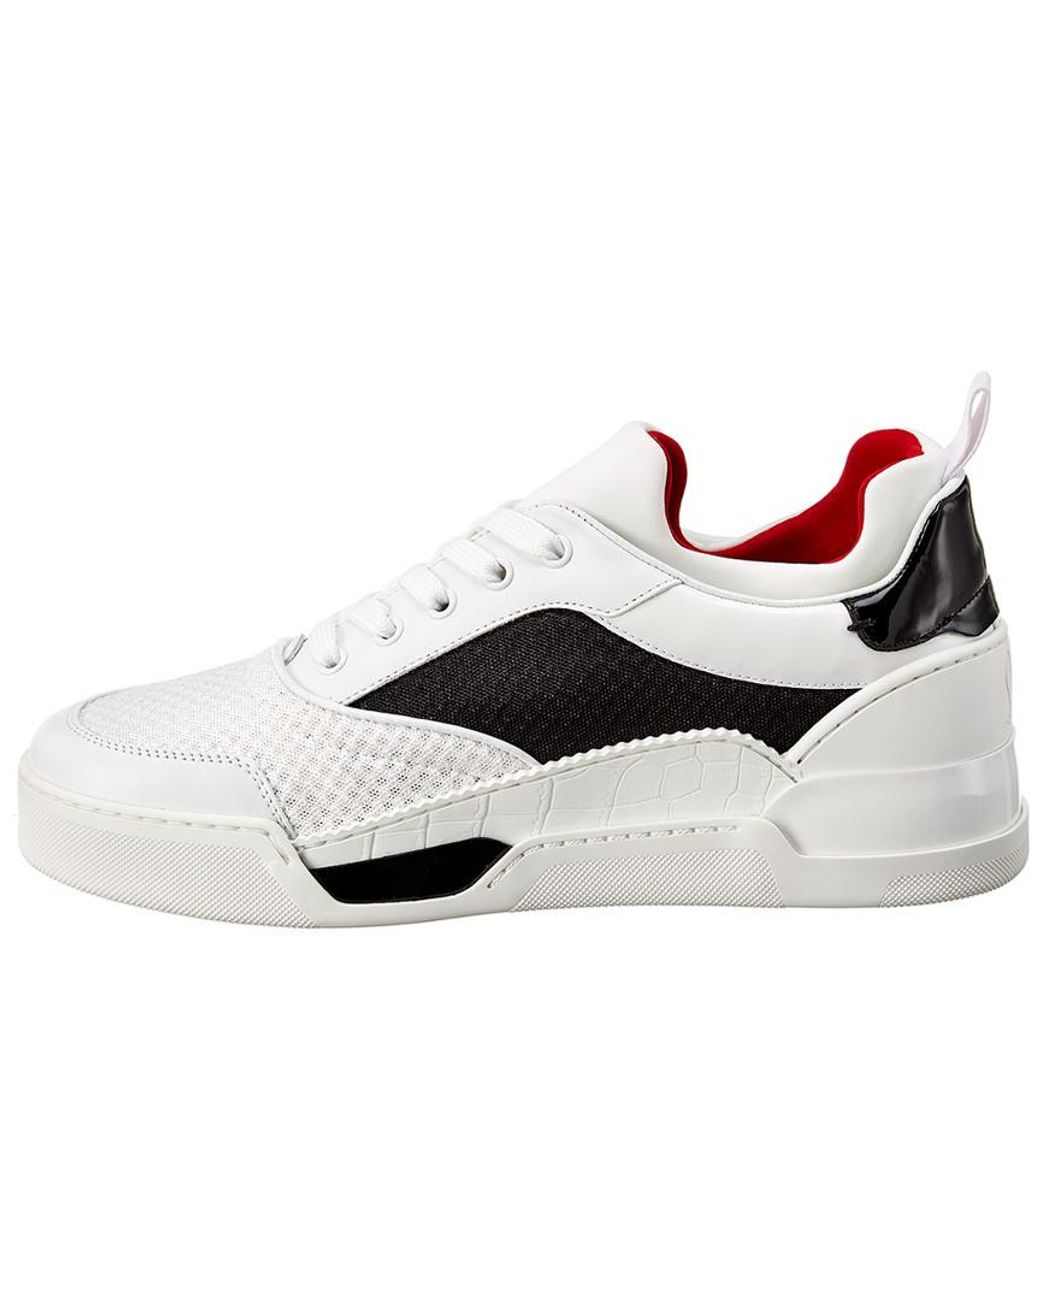 Christian Louboutin Aurelien Low-top Leather And Neoprene Trainers In White, ModeSens